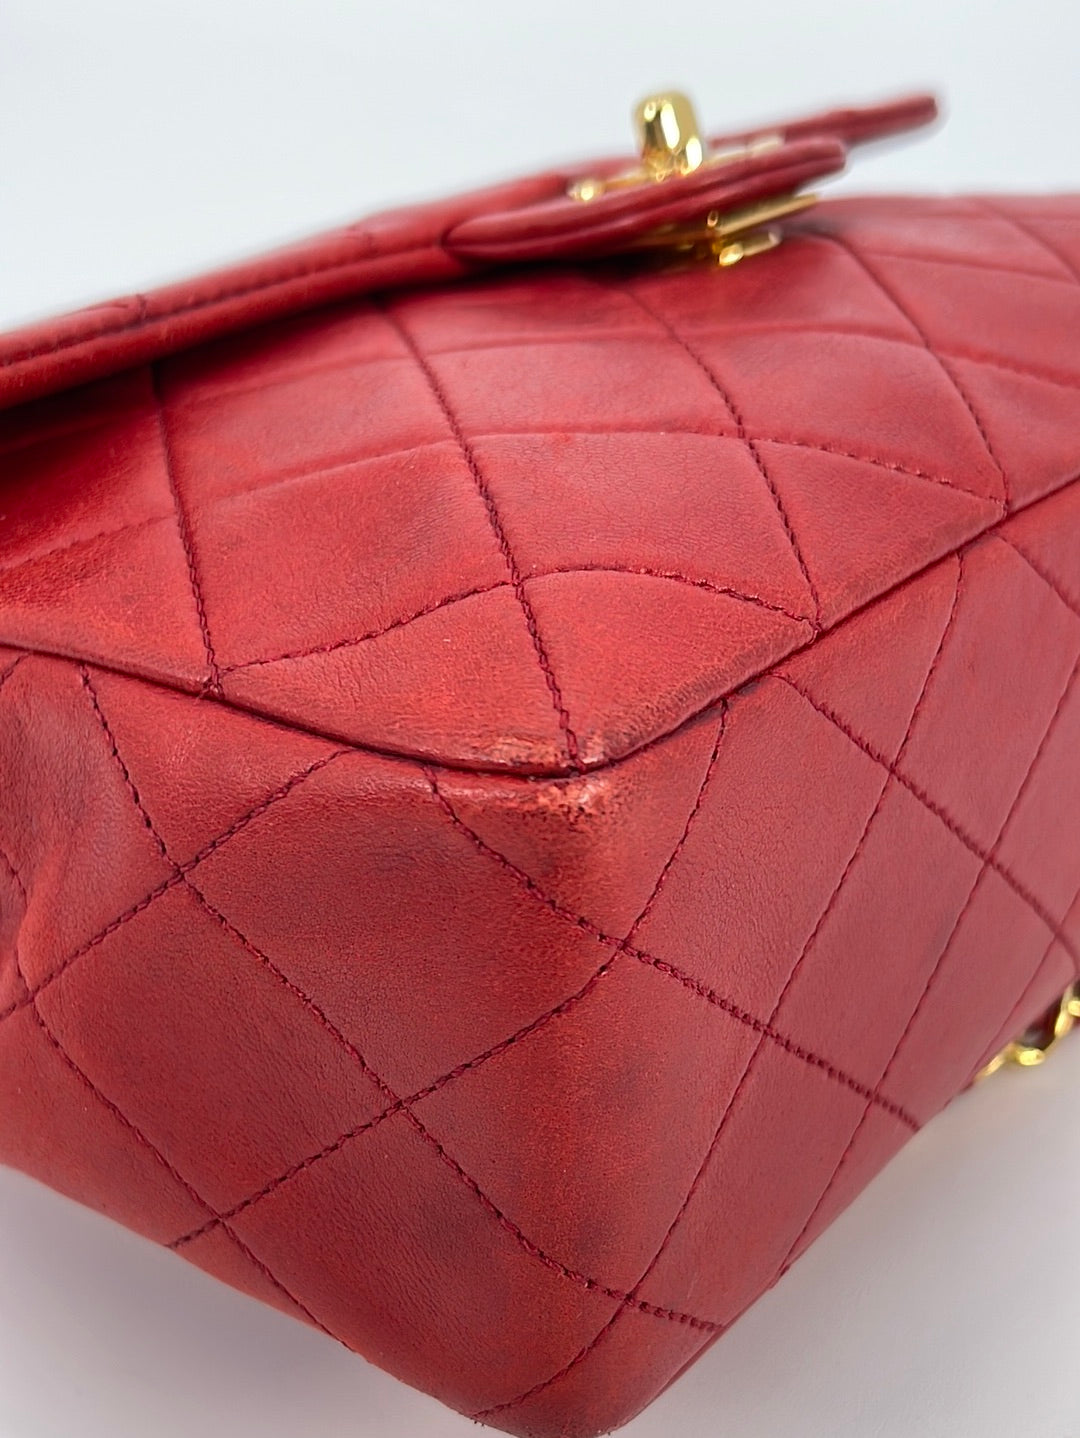 Vintage Rare CHANEL Red Lambskin Small Single Flap Square Bag 1279188 040123 *** LIVE SALE *** - $1380 OFF